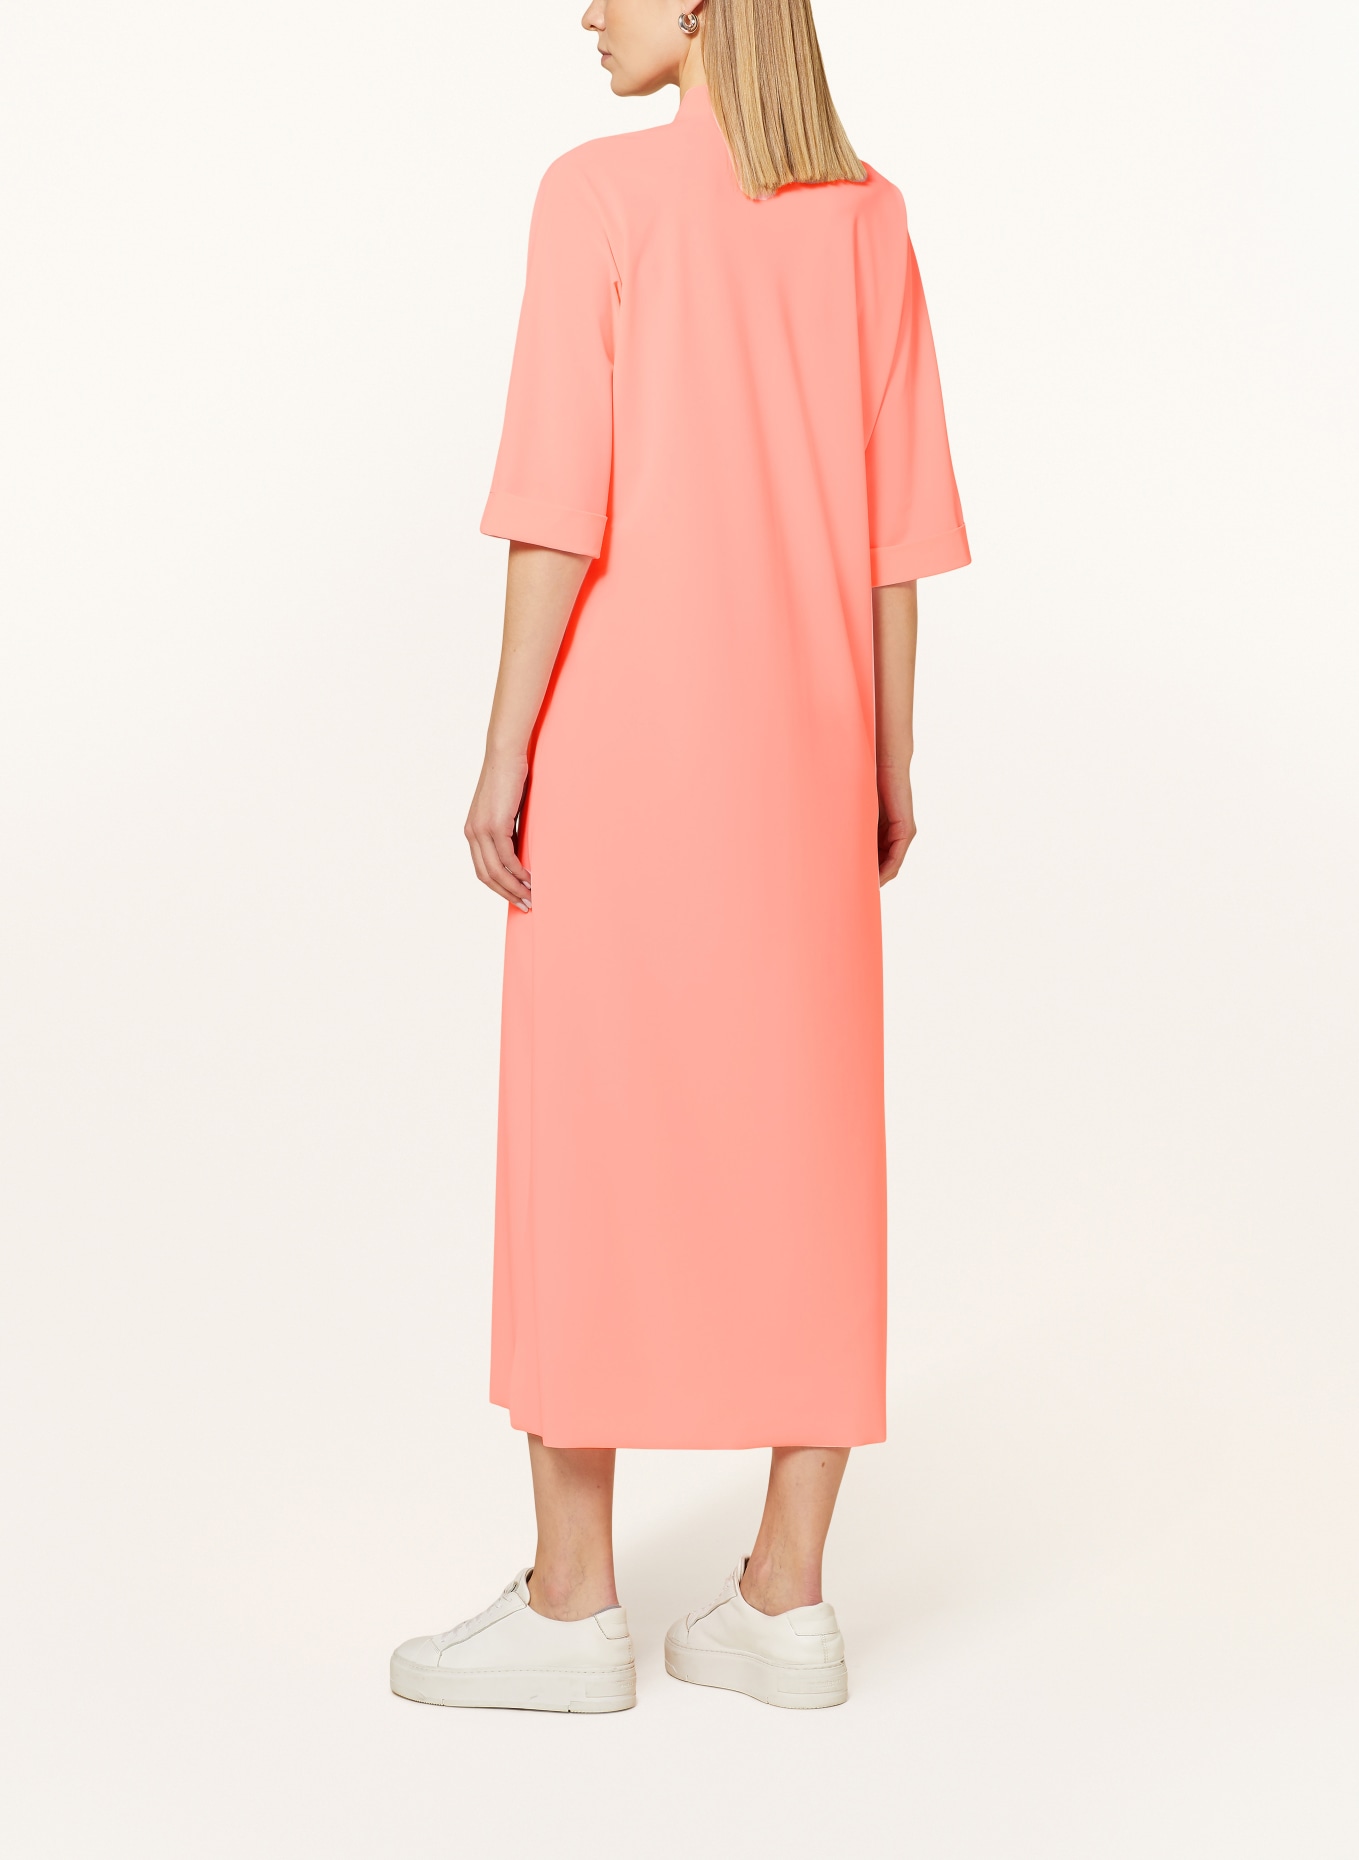 ULLI EHRLICH SPORTALM Dress with 3/4 sleeves, Color: NEON PINK (Image 3)